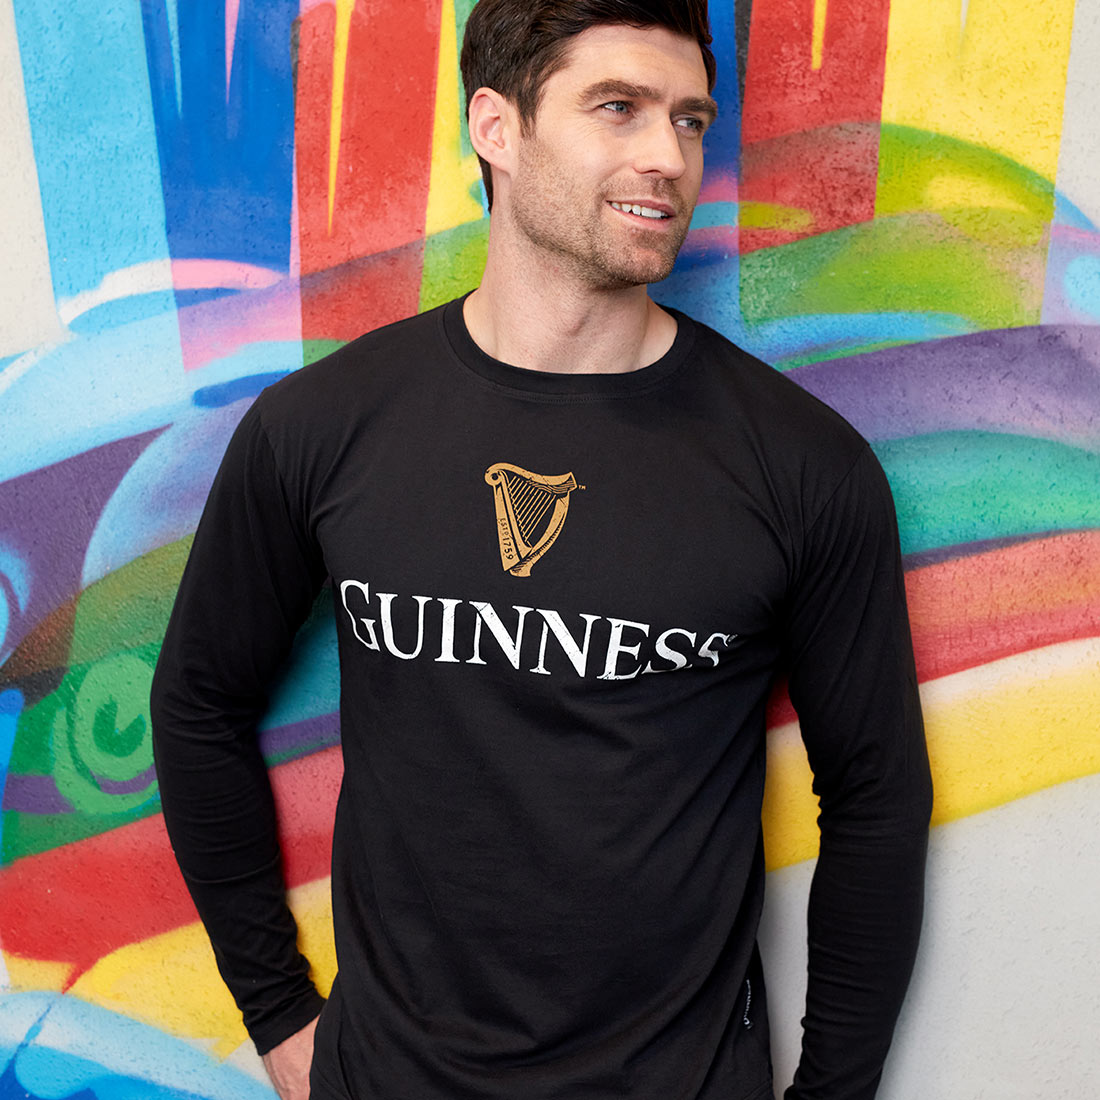 Guinness Black Trademark label Long sleeve Premium tee shirt is a trendy garment featuring the iconic Guinness trademark.